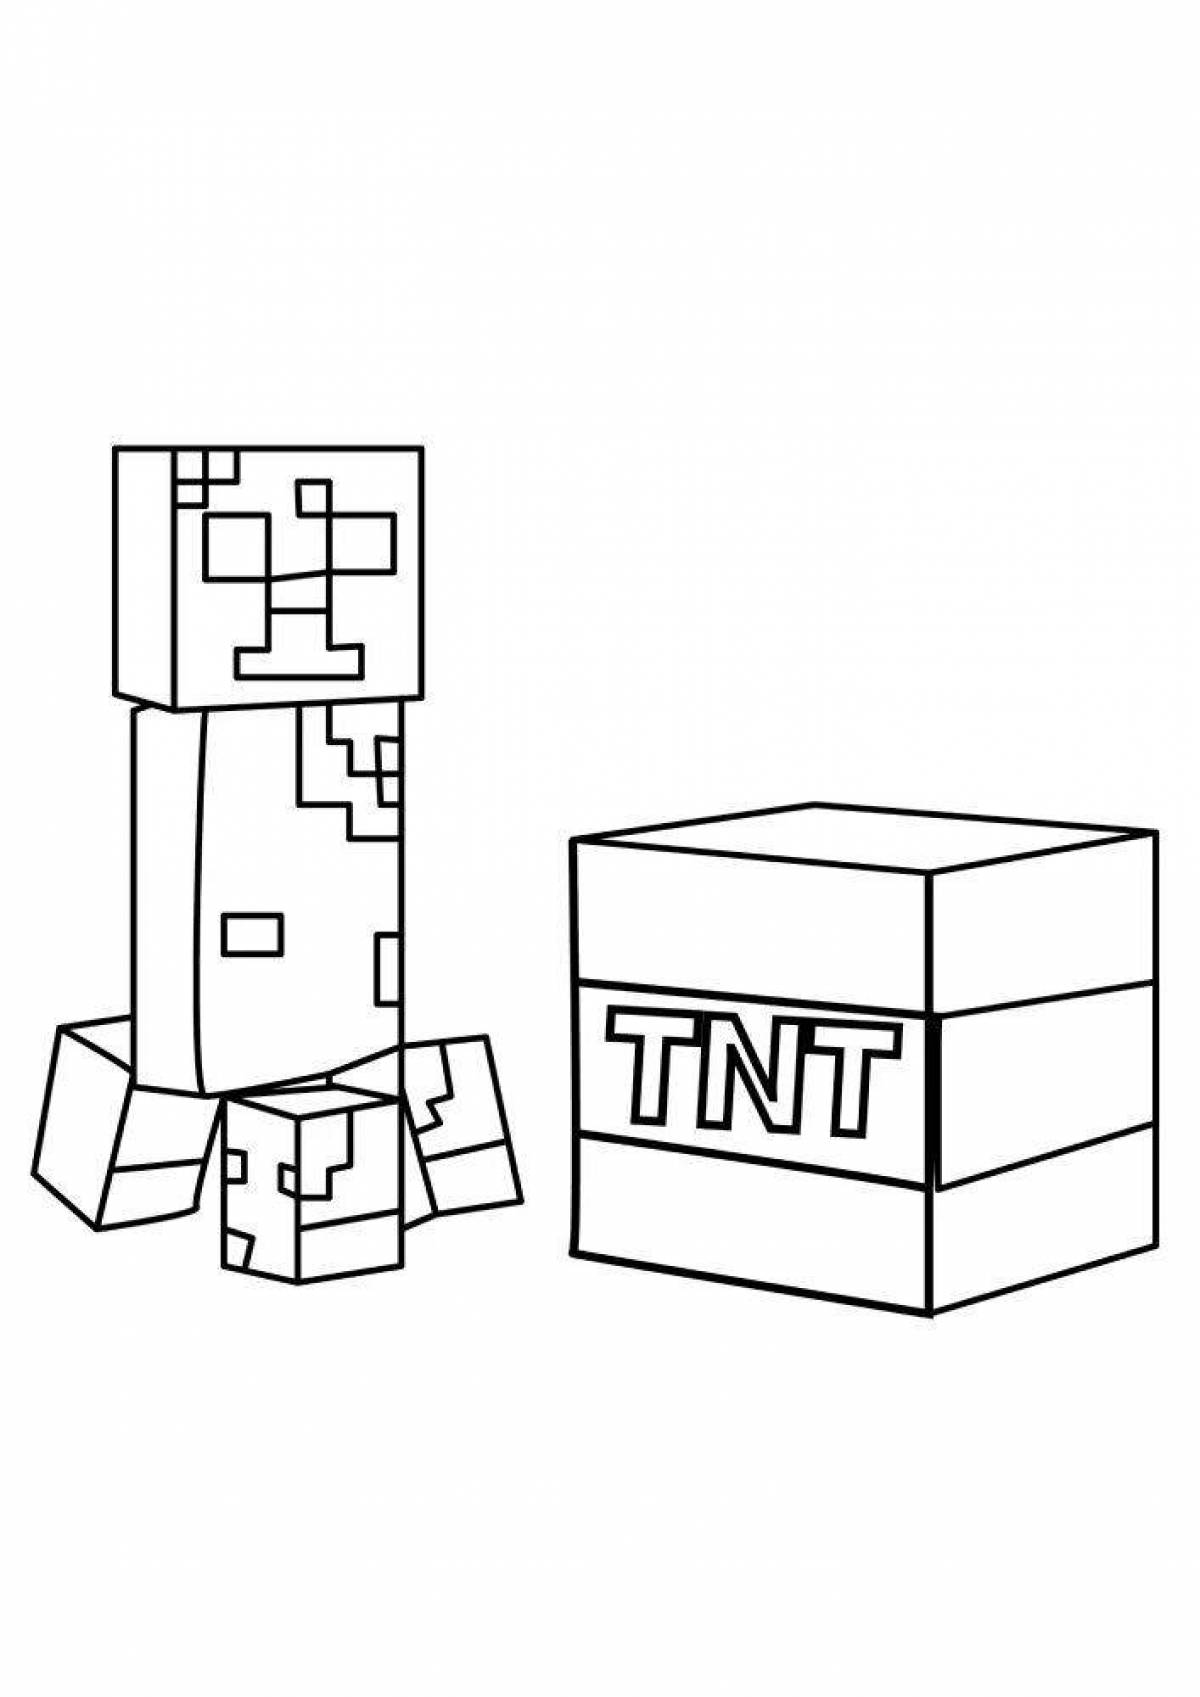 Updating tnt coloring page